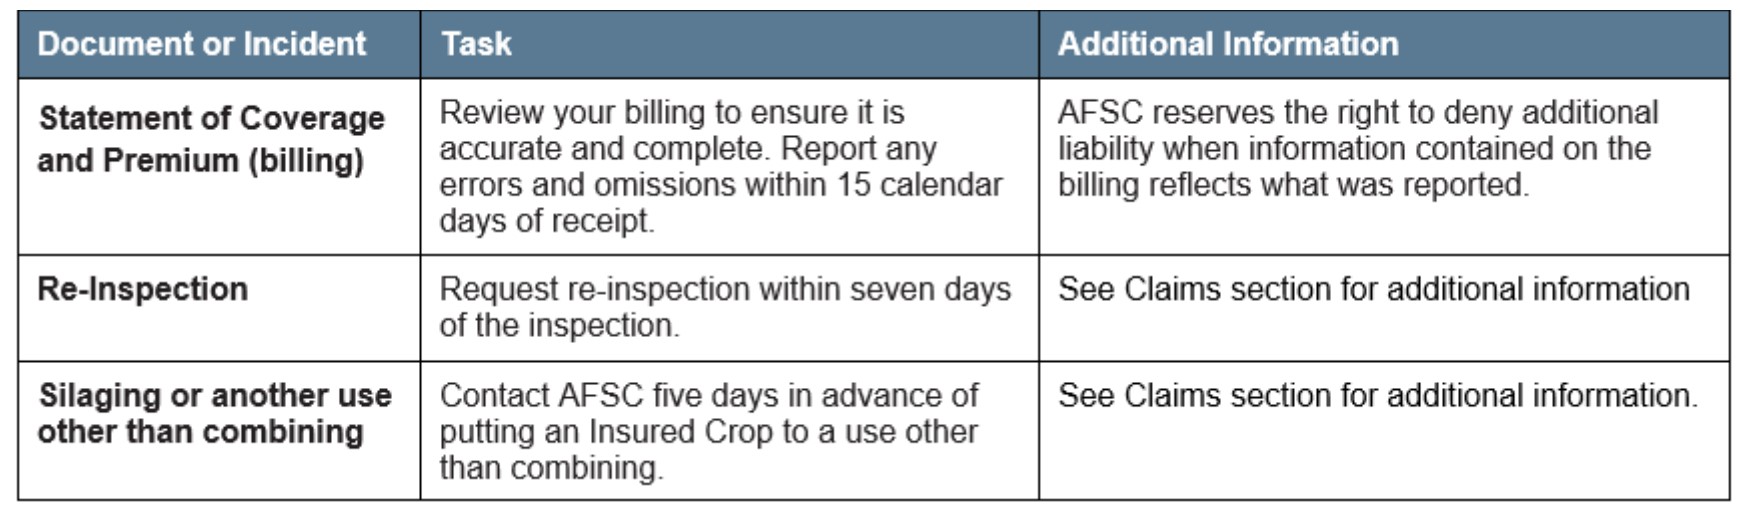 Grain Crop Article 4 Other Deadlines. Call AFSC for details